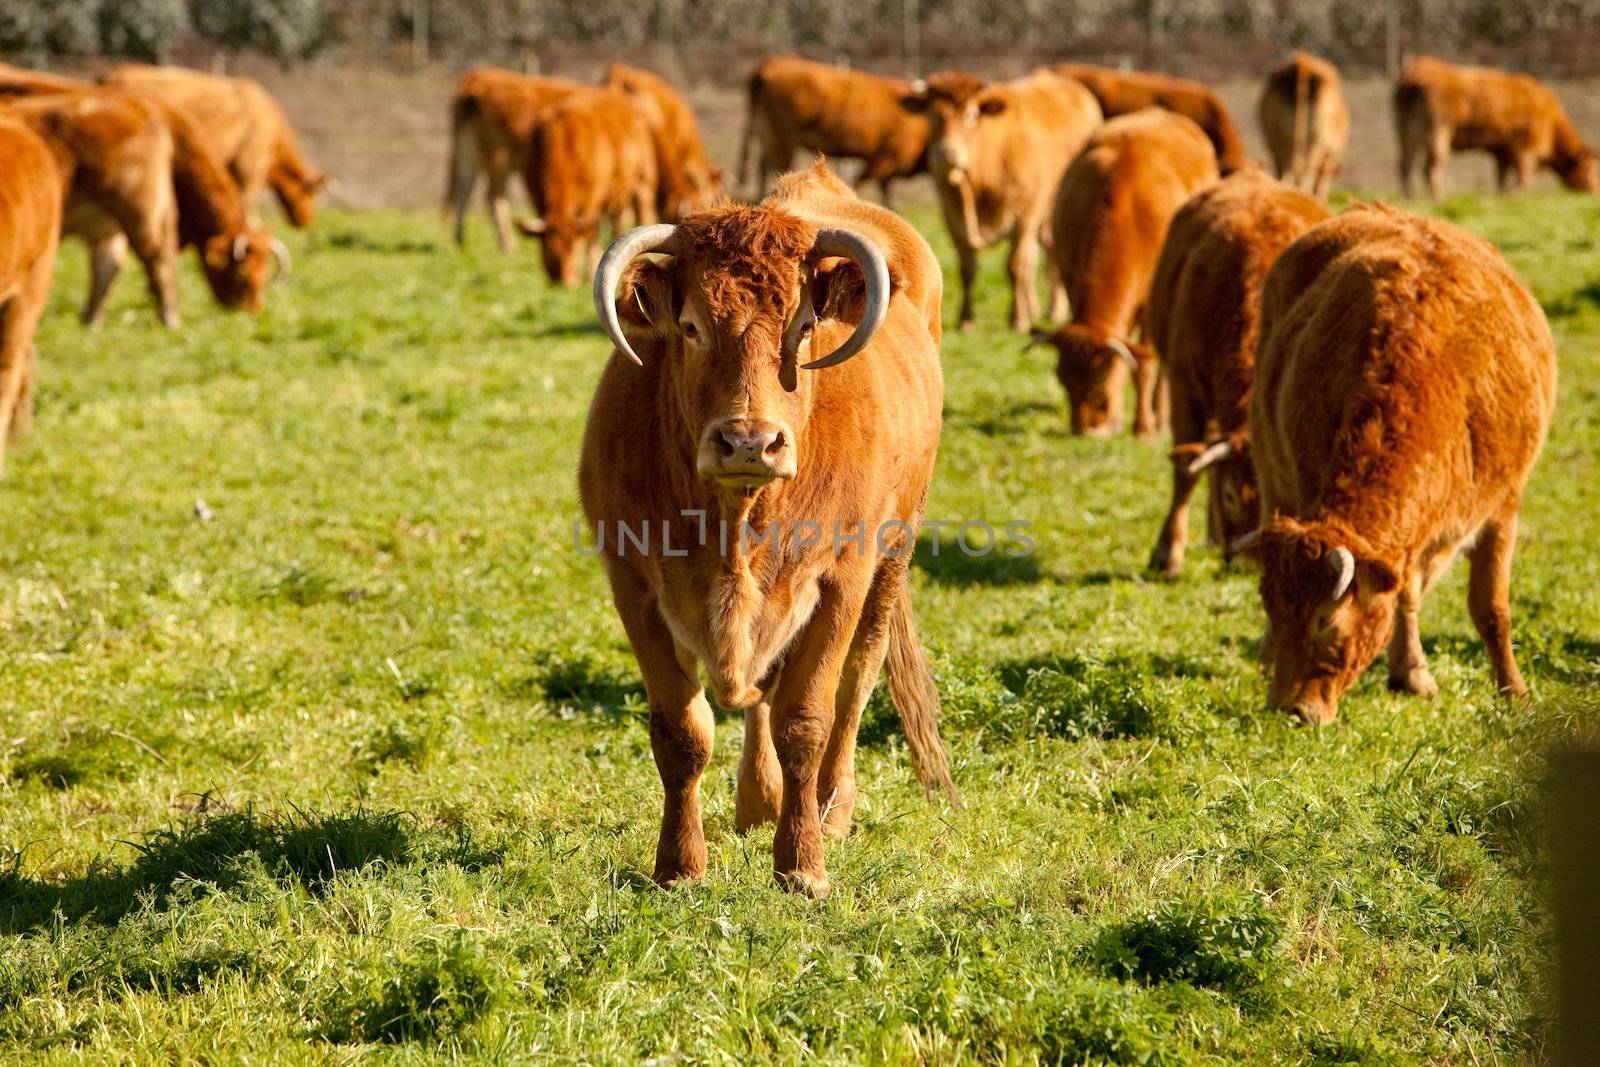 Cows by Gravicapa